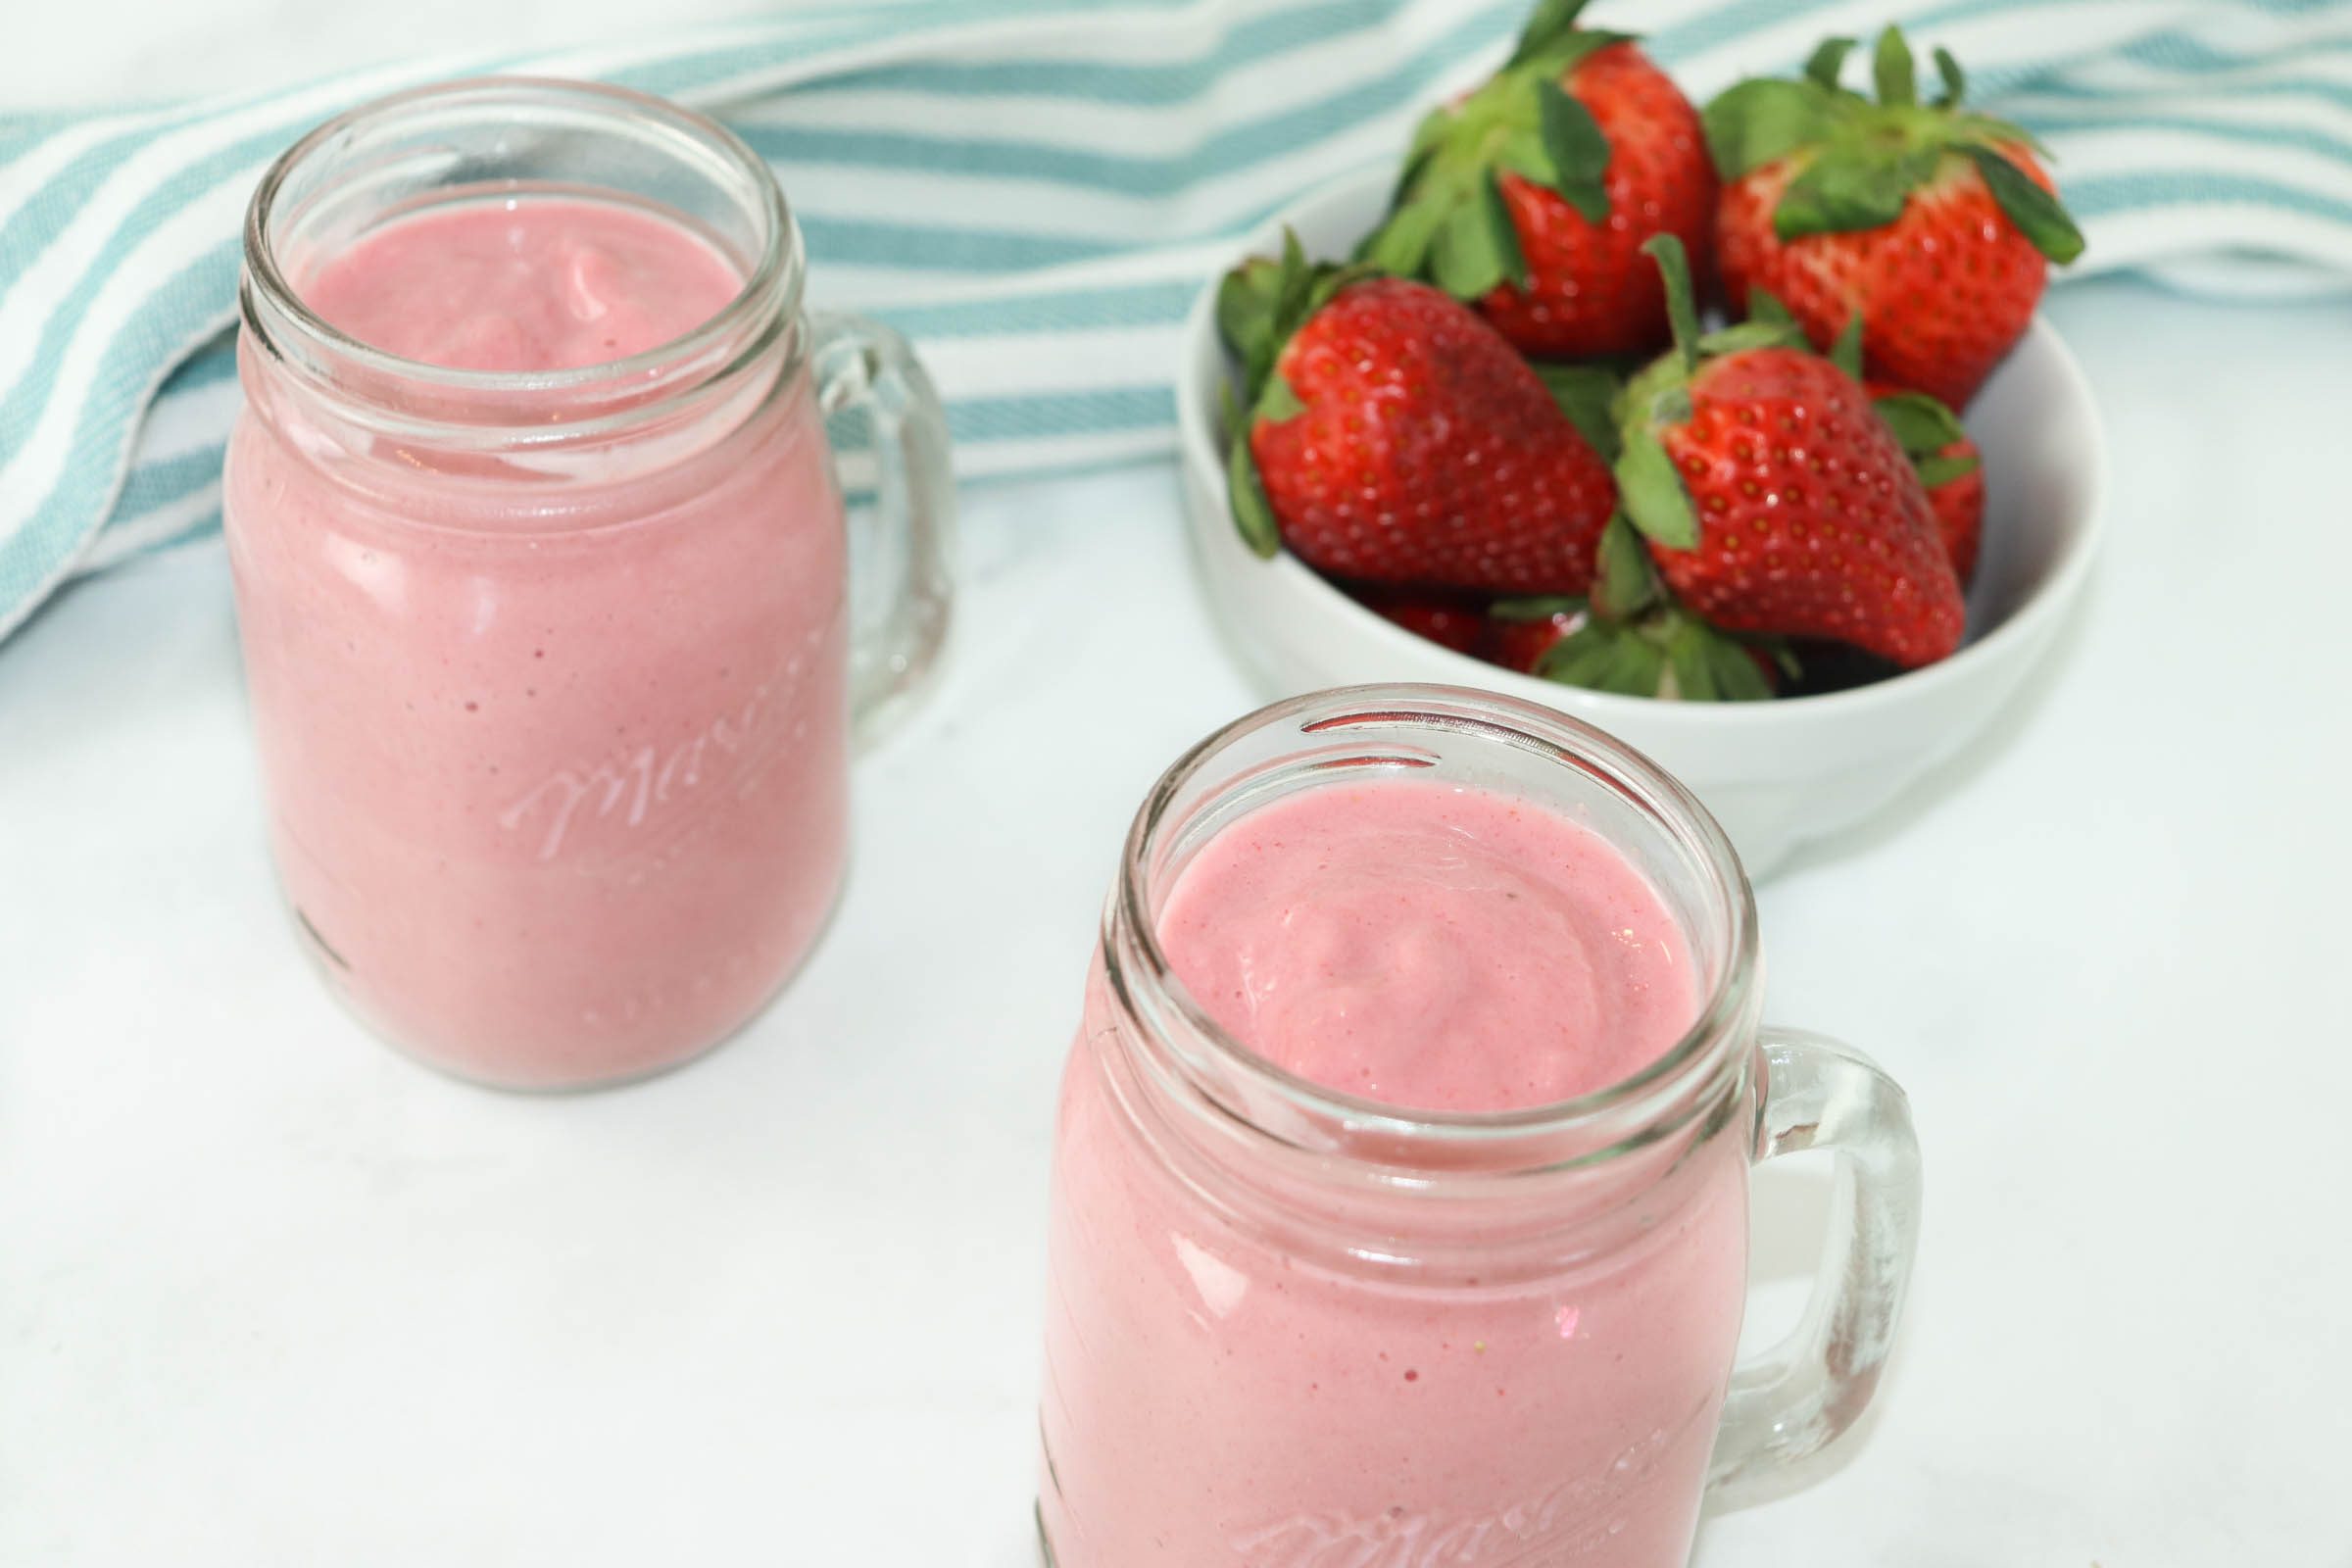 I love starting my mornings with a fresh smoothie and this healthy strawberry smoothie is one of the best! You’ll definitely want to add this recipe to your collection.